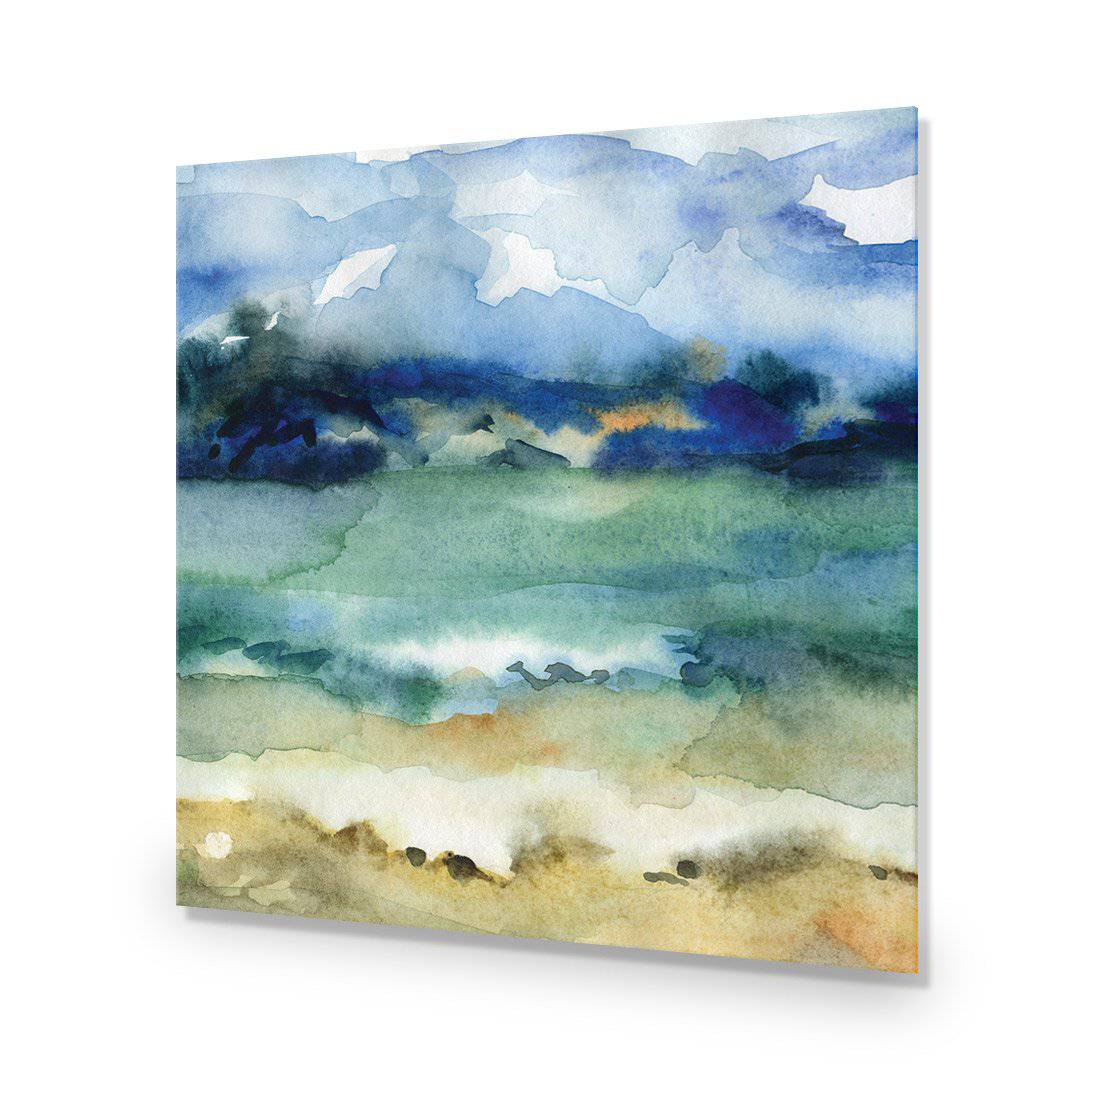 Timeless, Square-Acrylic-Wall Art Design-Without Border-Acrylic - No Frame-37x37cm-Wall Art Designs